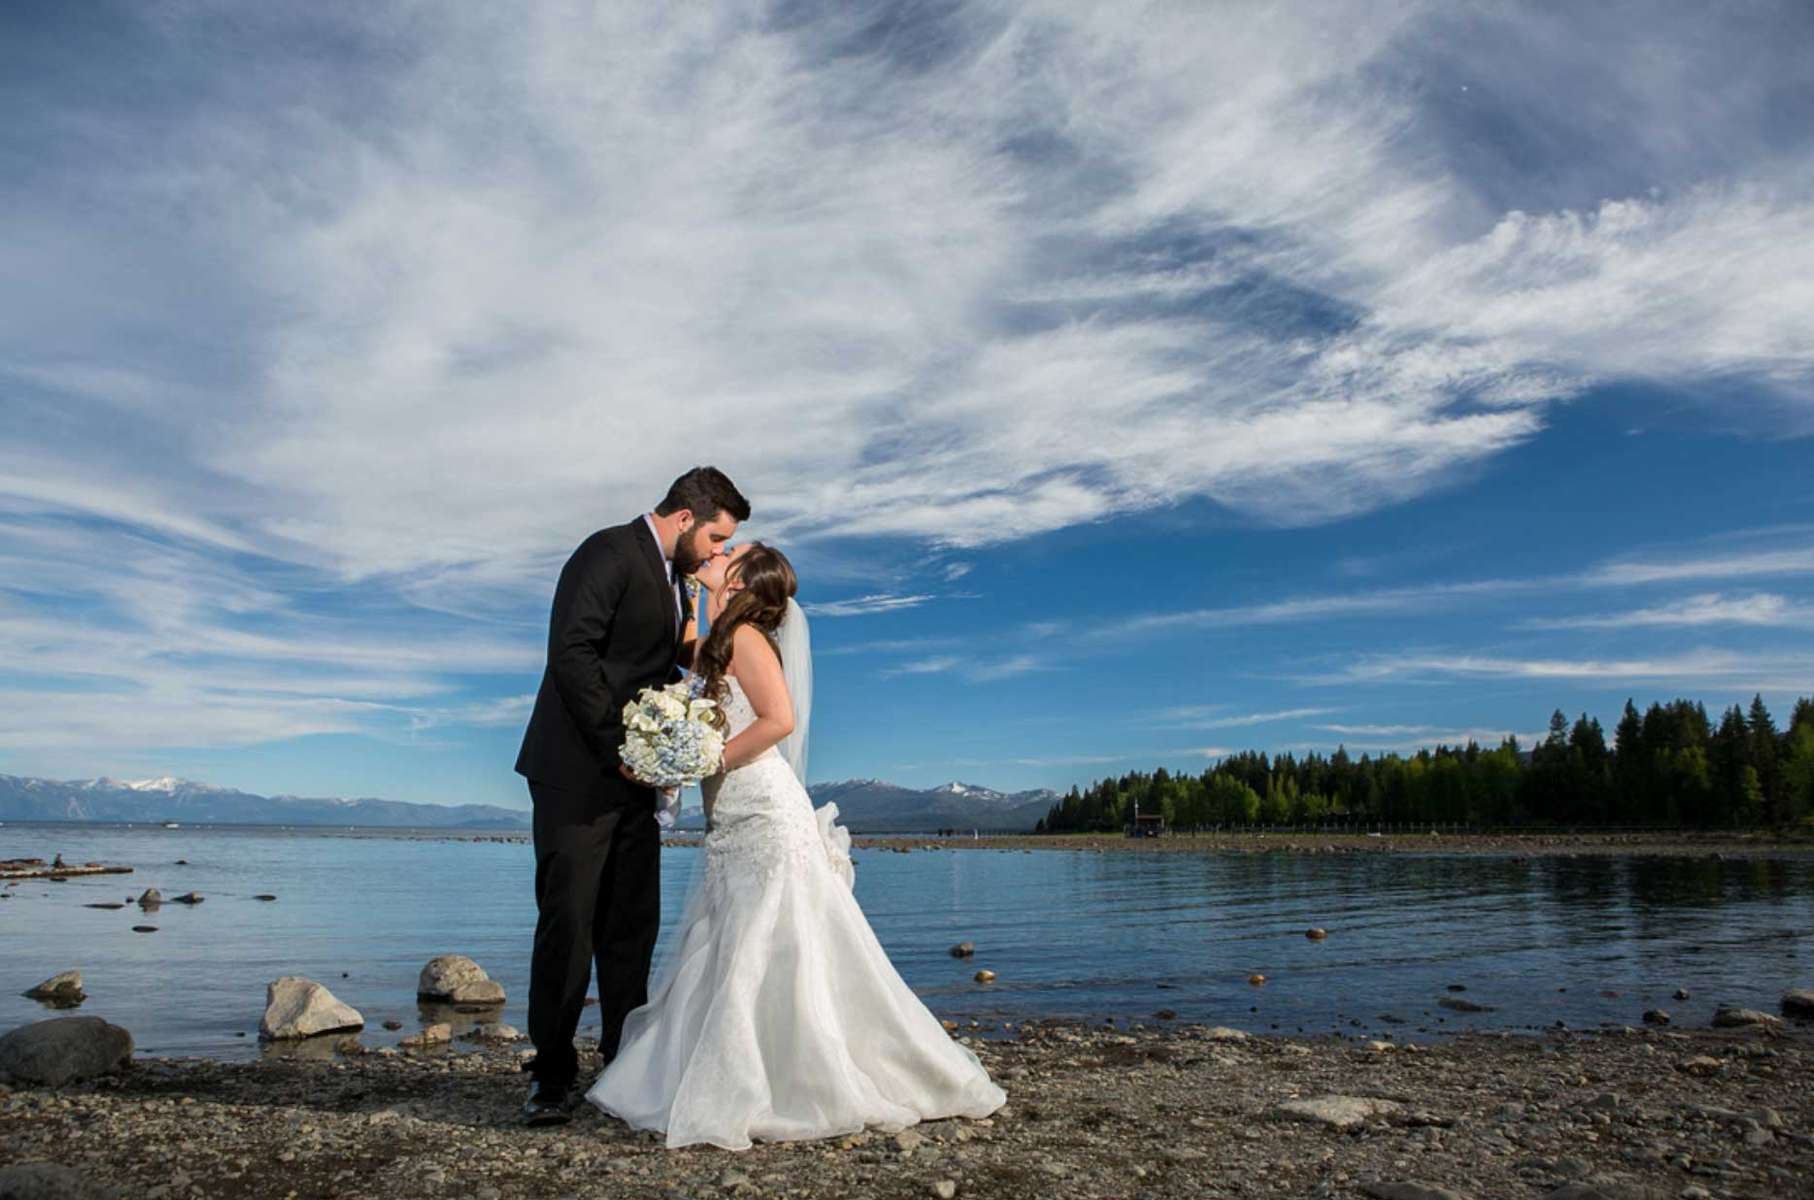 Nestled amidst the breathtaking beauty of Lake Tahoe, Sarah and John's wedding was nothing short of a dream come true. The serene, crystal-clear waters of the lake provided a stunning backdrop for their special day, reflecting the love and commitment they shared. Surrounded by towering pine trees and the majestic Sierra Nevada mountains, their ceremony was a picture-perfect moment that blended nature's grandeur with their heartfelt vows. As the sun dipped behind the mountains, casting a warm, golden glow over the festivities, friends and family gathered to celebrate this union in a rustic lakeside venue. From the intimate ceremony by the water's edge to the lively reception under the stars, it was a day filled with love, laughter, and the unparalleled magic of Lake Tahoe.